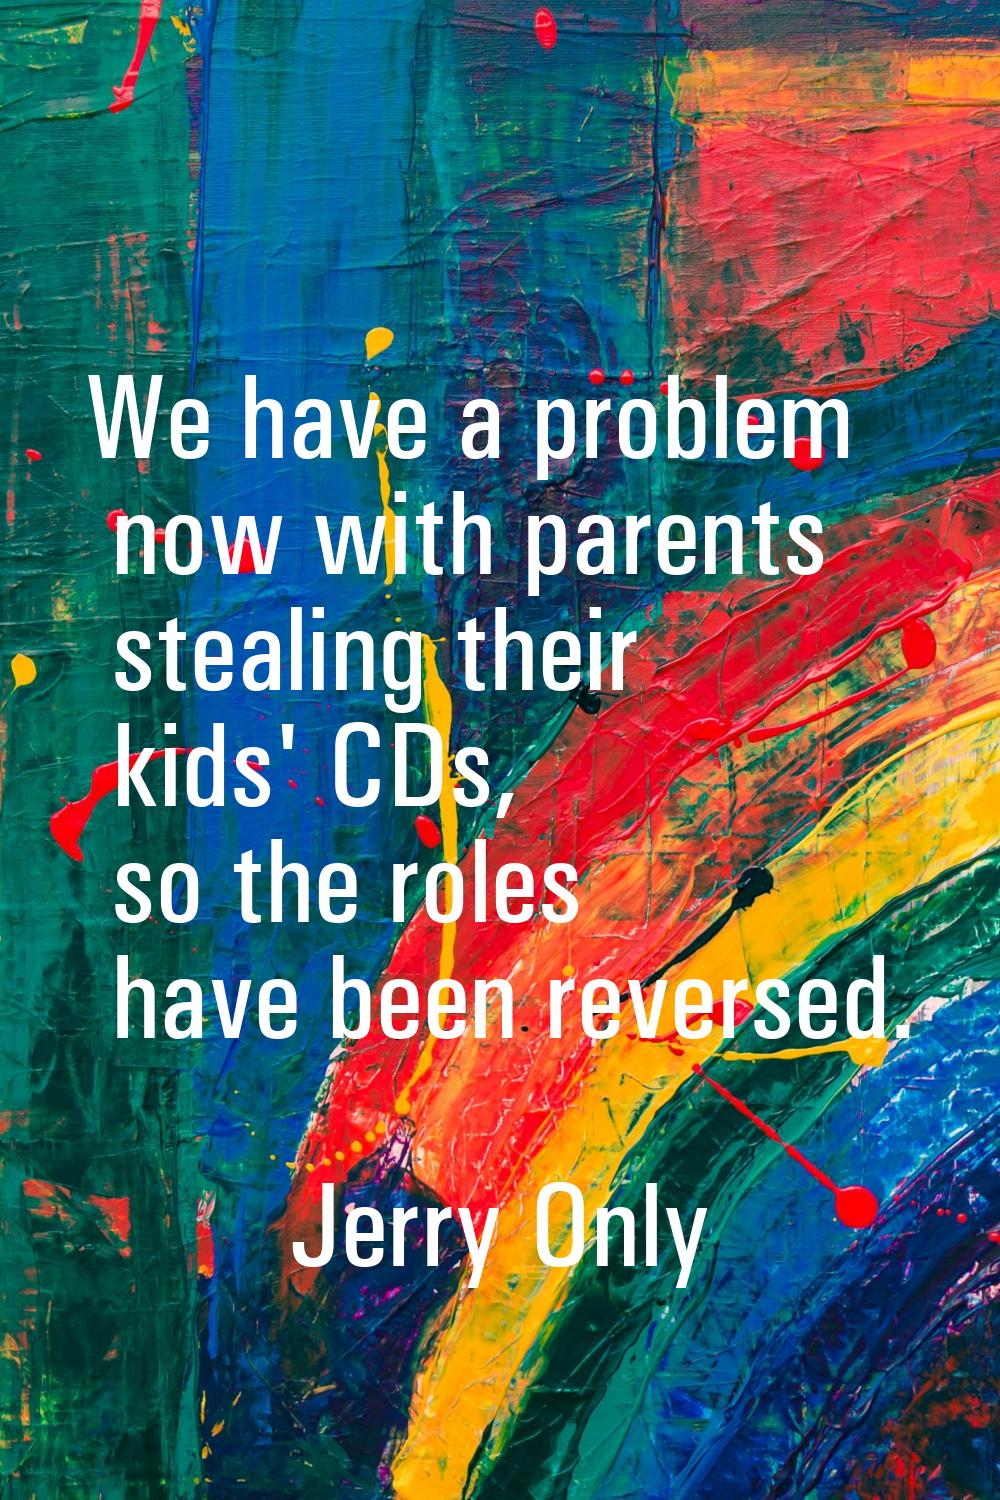 We have a problem now with parents stealing their kids' CDs, so the roles have been reversed.